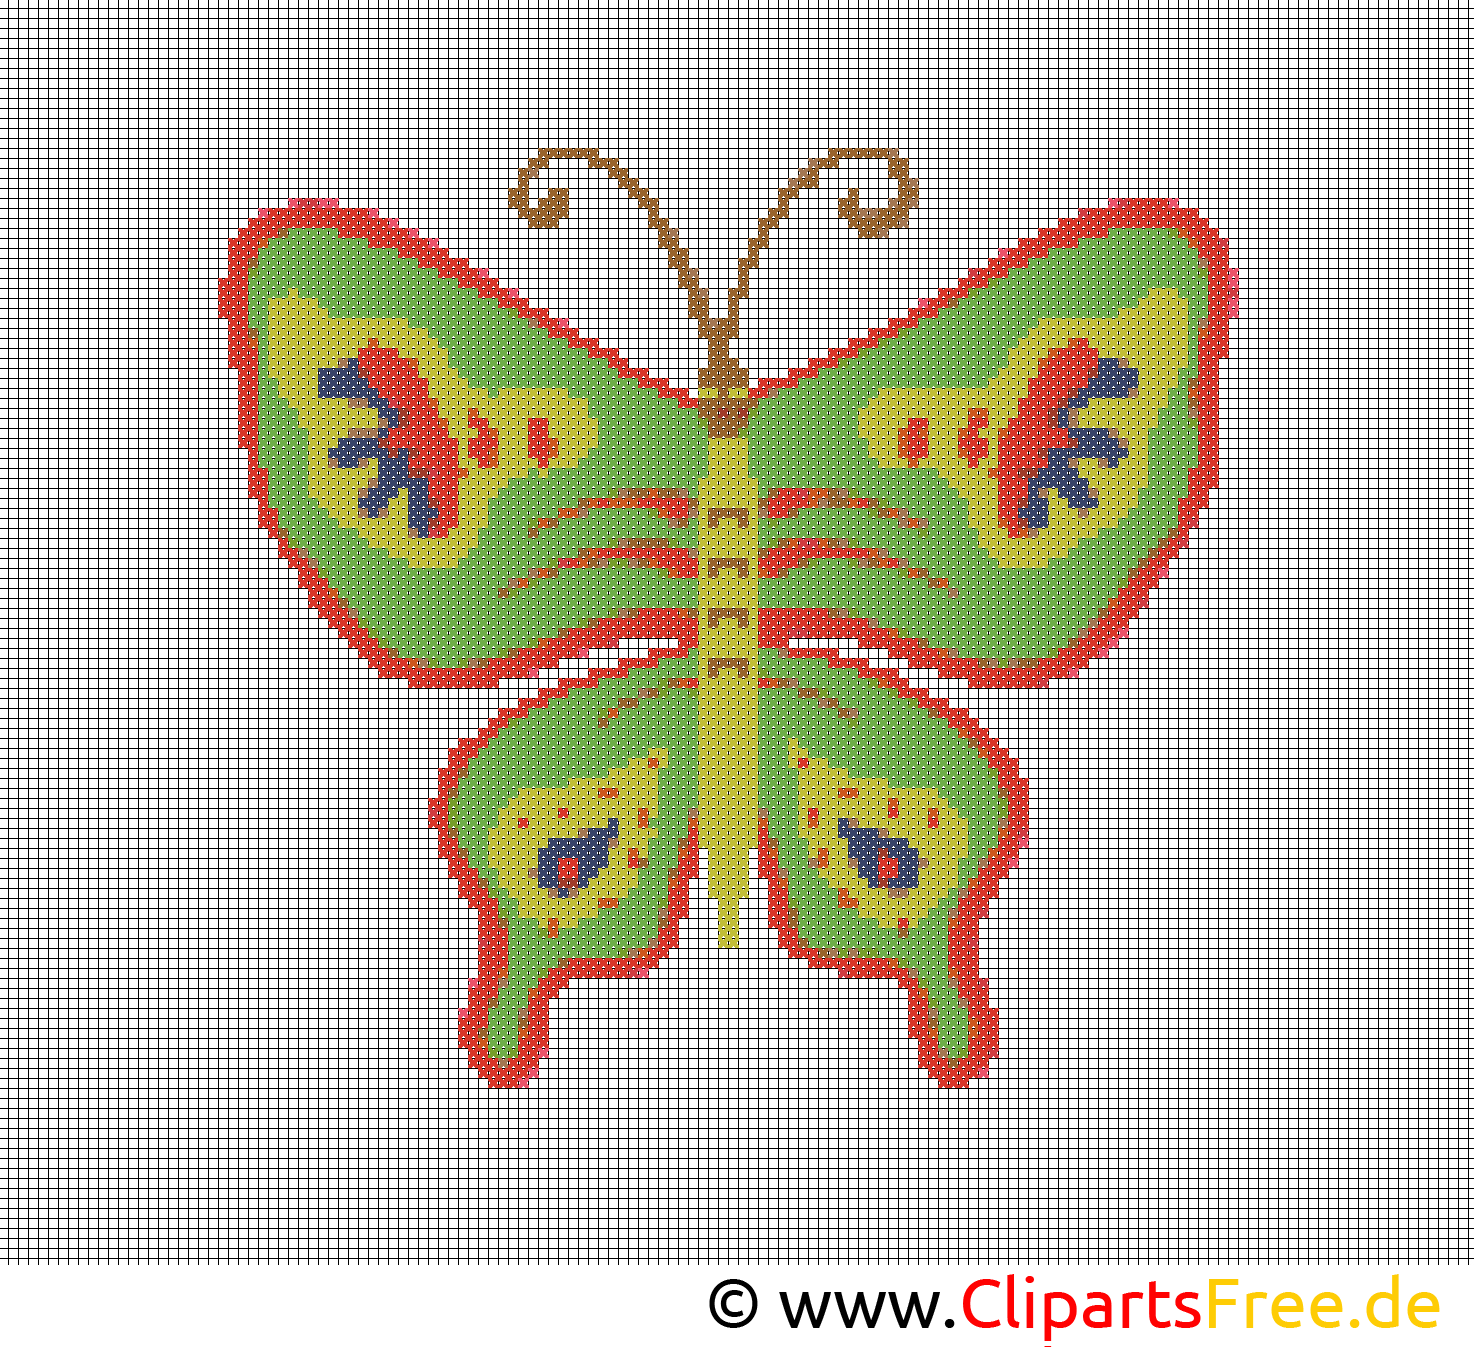 Papillon image – Broderie images cliparts